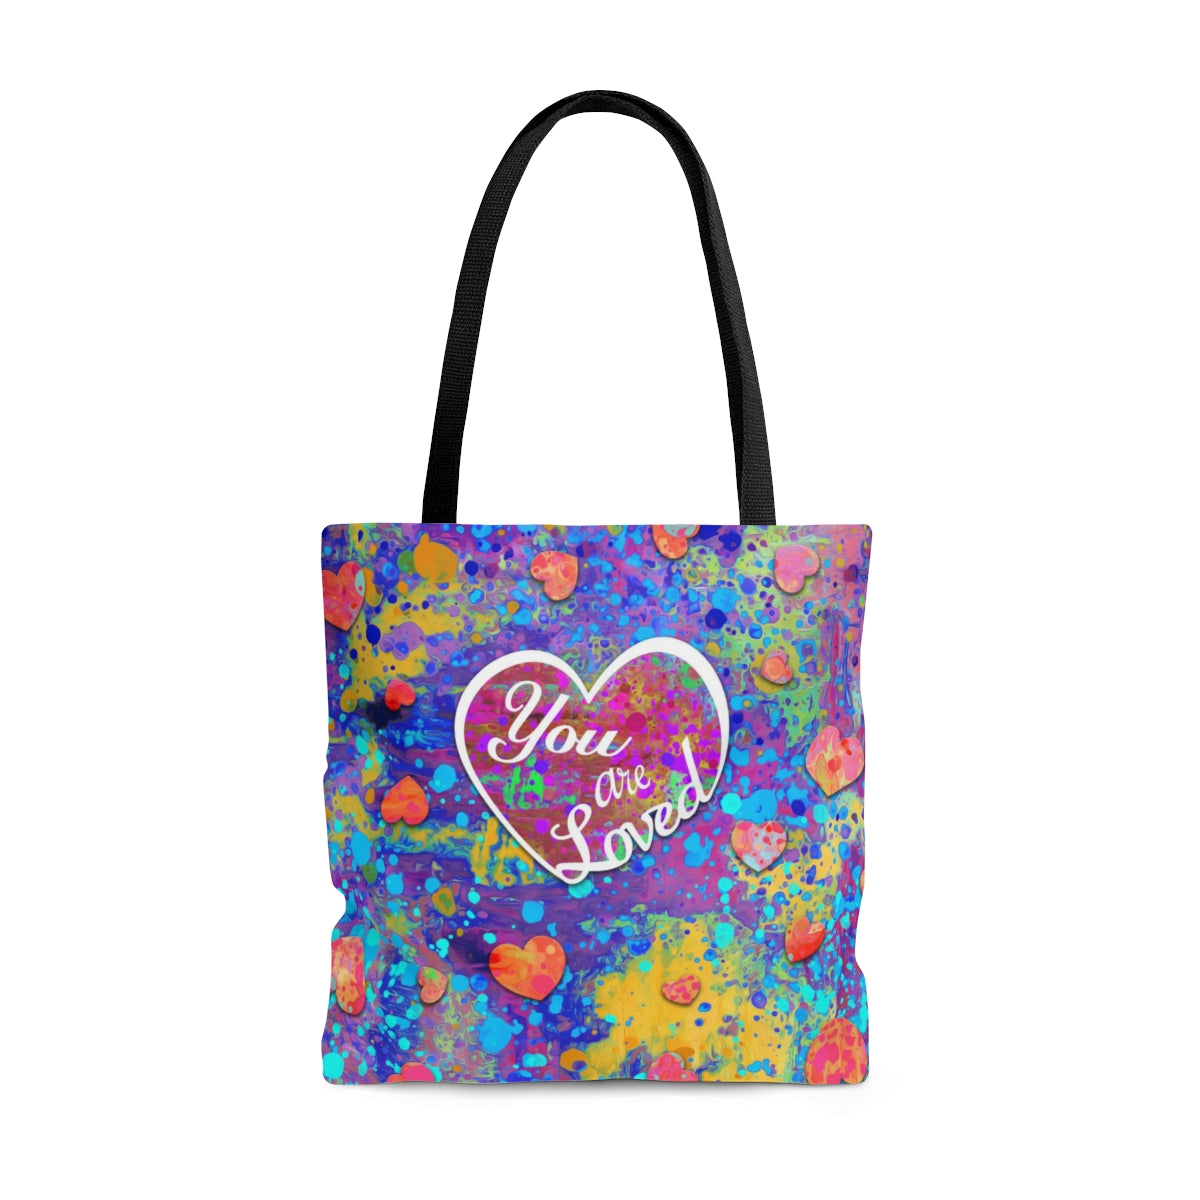 Tote Bag - You Are Loved